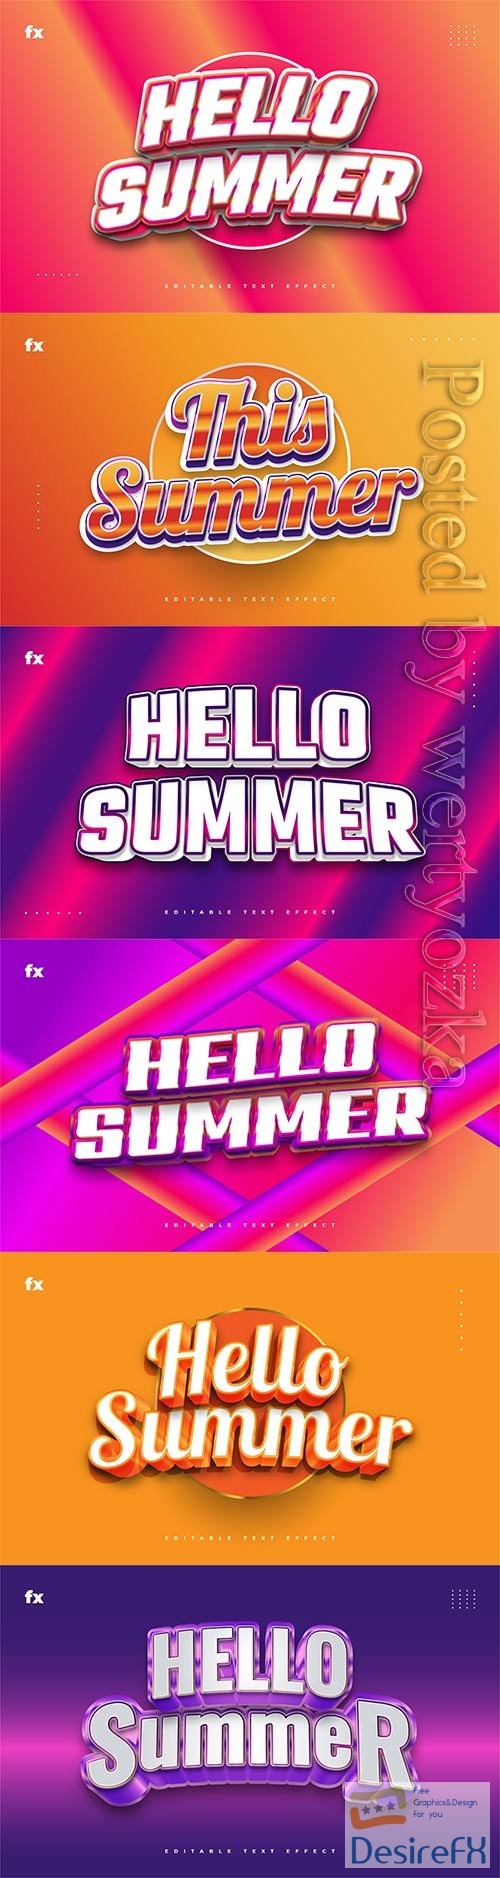 Hello summer 3d editable text style effect in vector vol 5